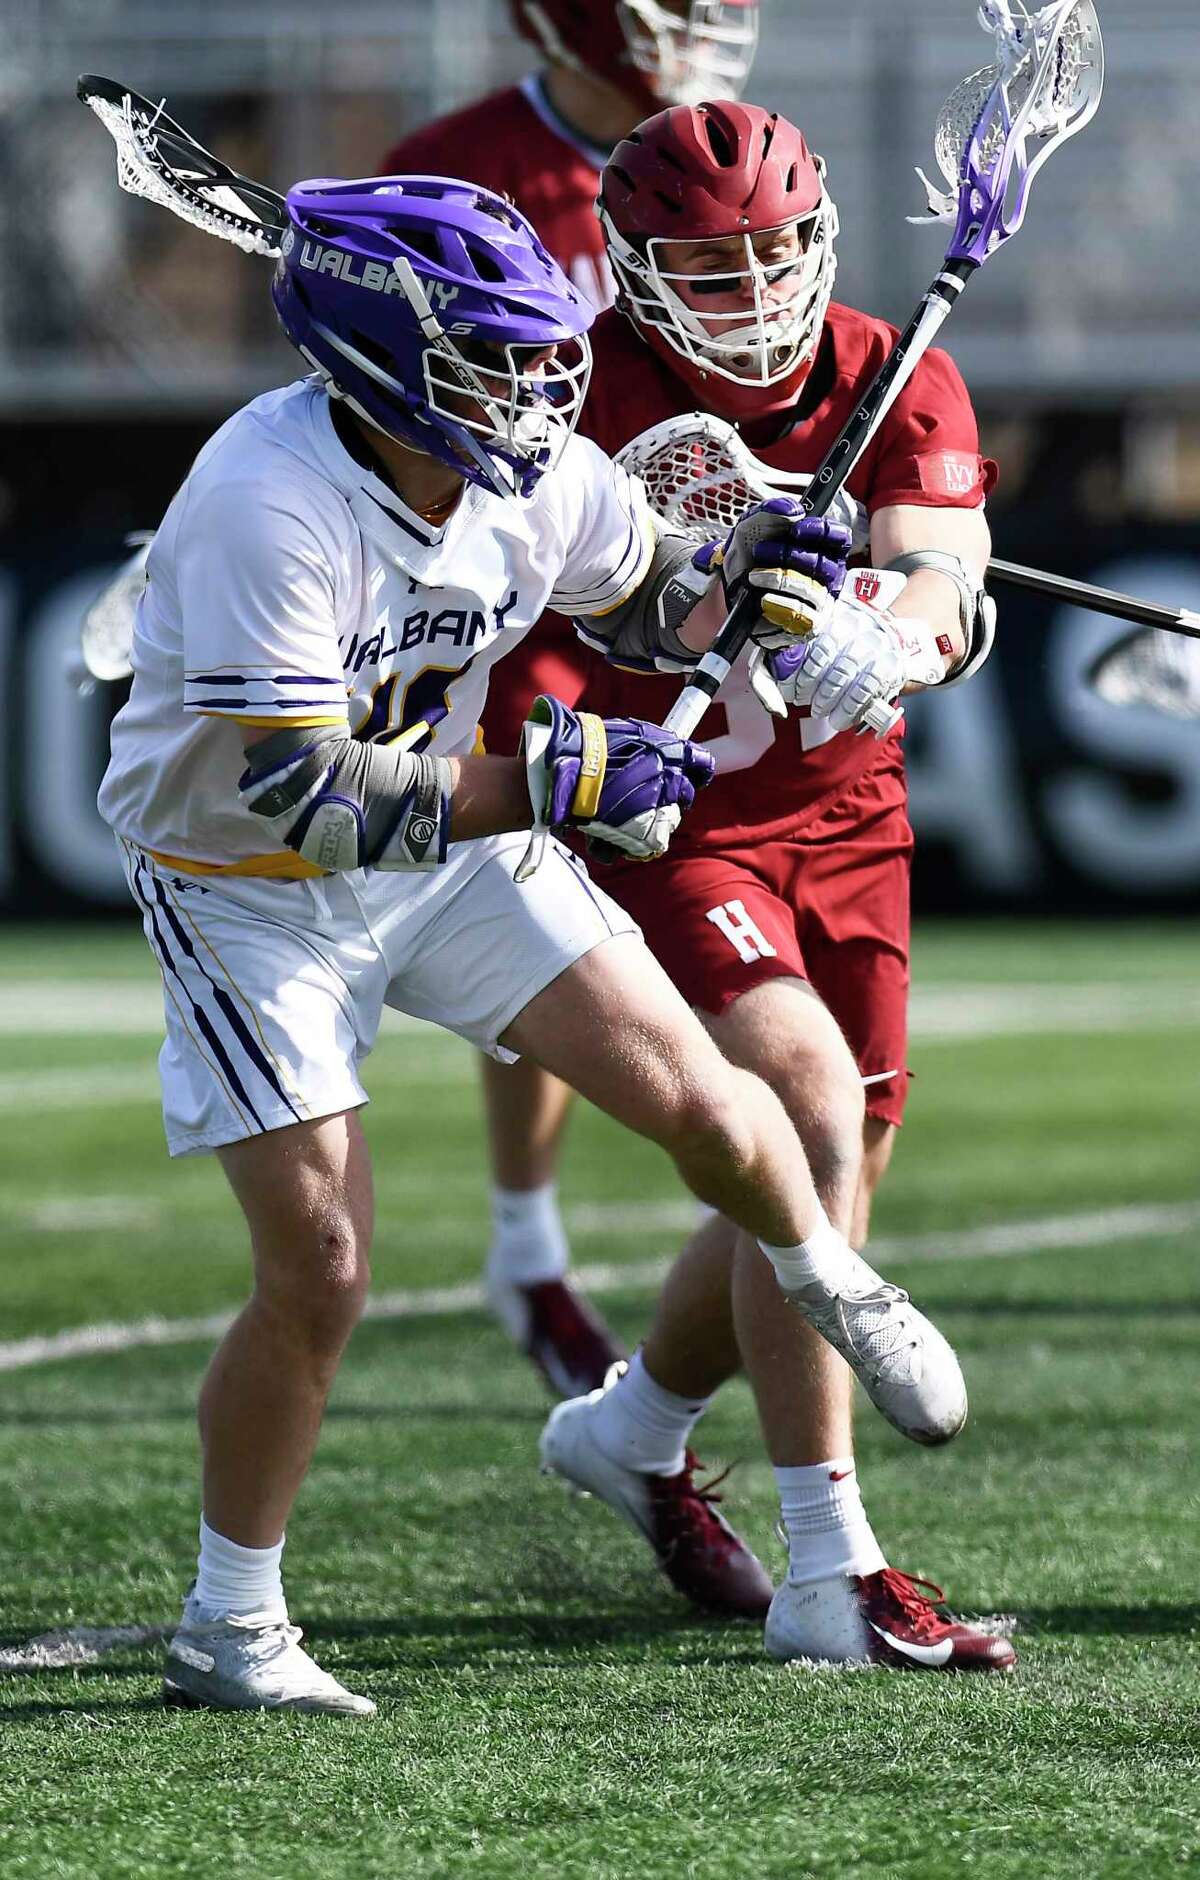 UAlbany's Graydon Hogg, shown in a game in 2020, had a goal and two assists in the Danes' loss to Cornell on Saturday, Feb. 19, 2022.